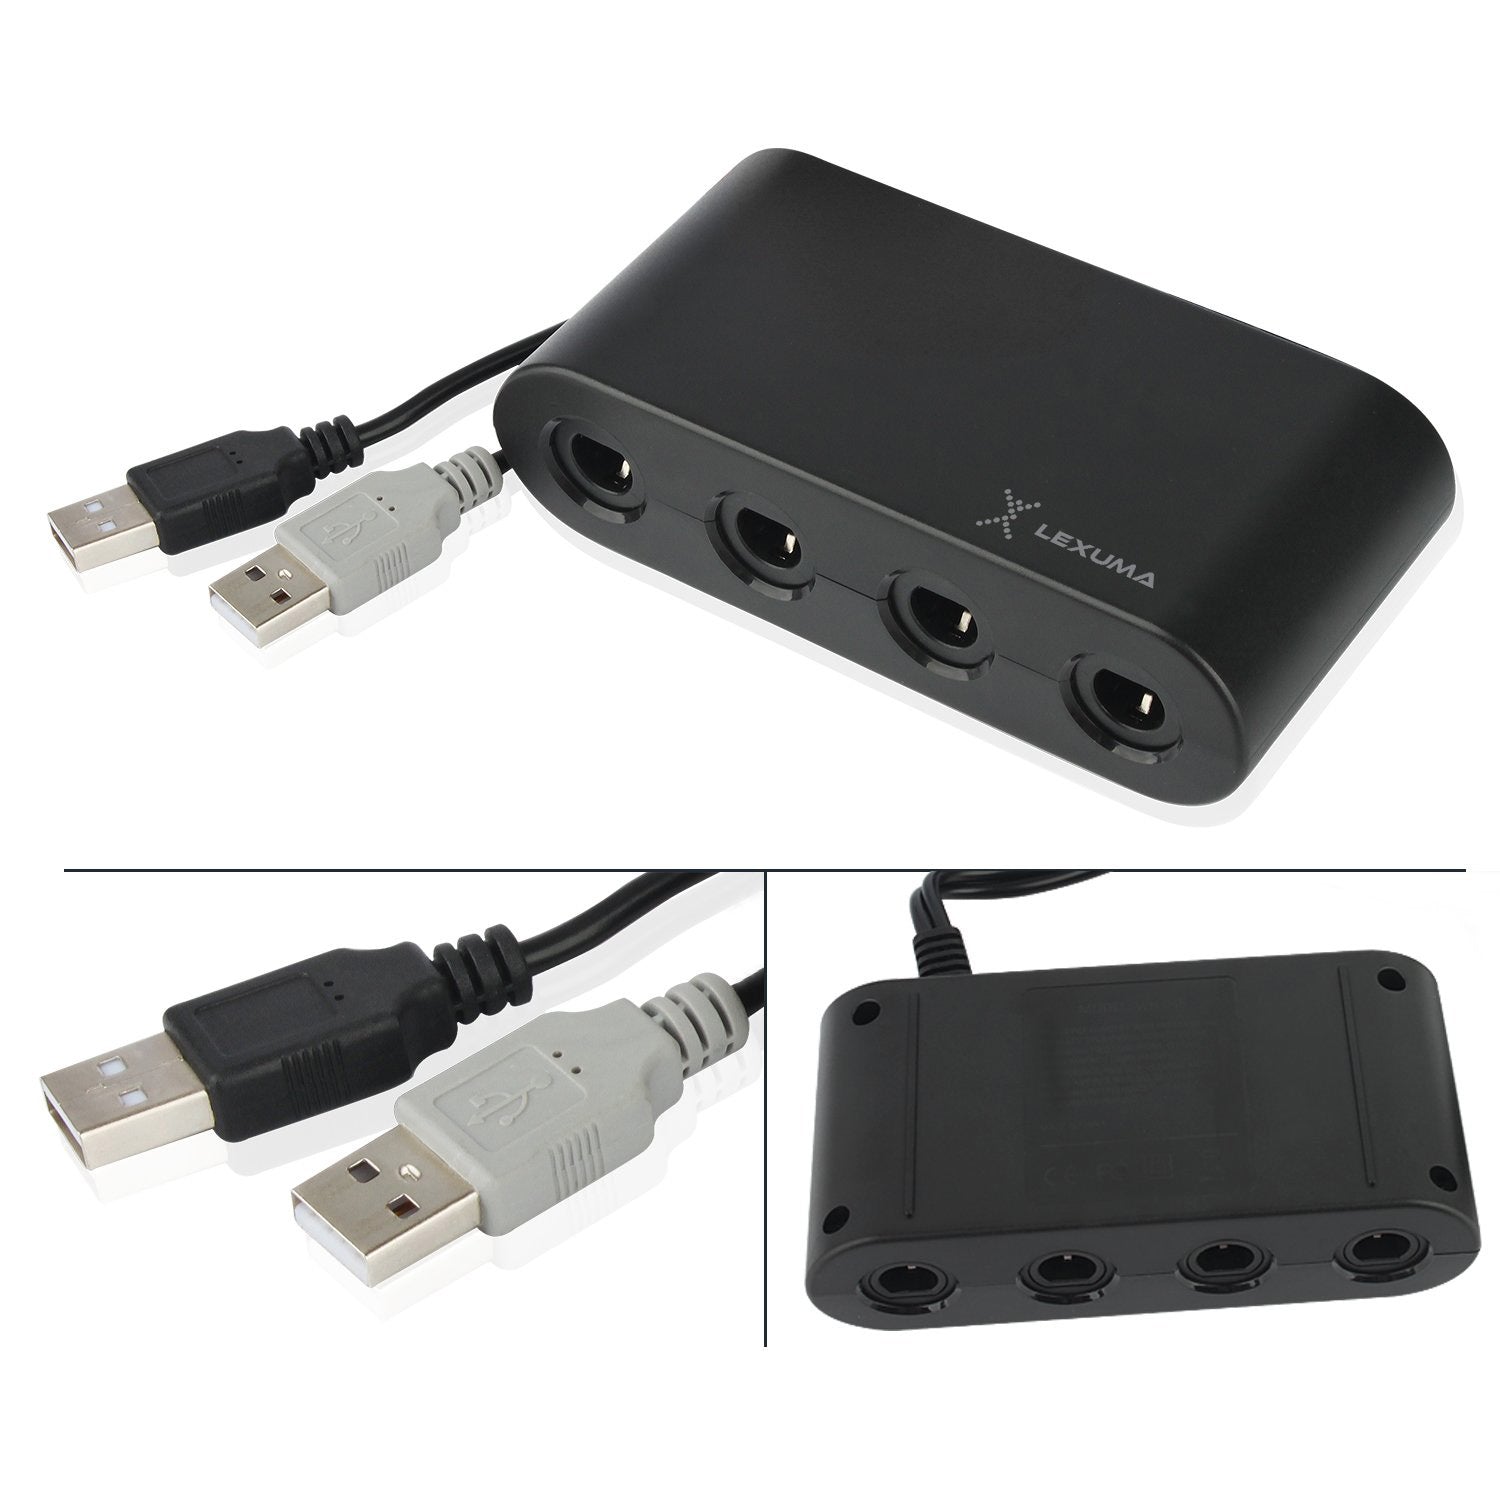 gamecube controller for wii u adapter